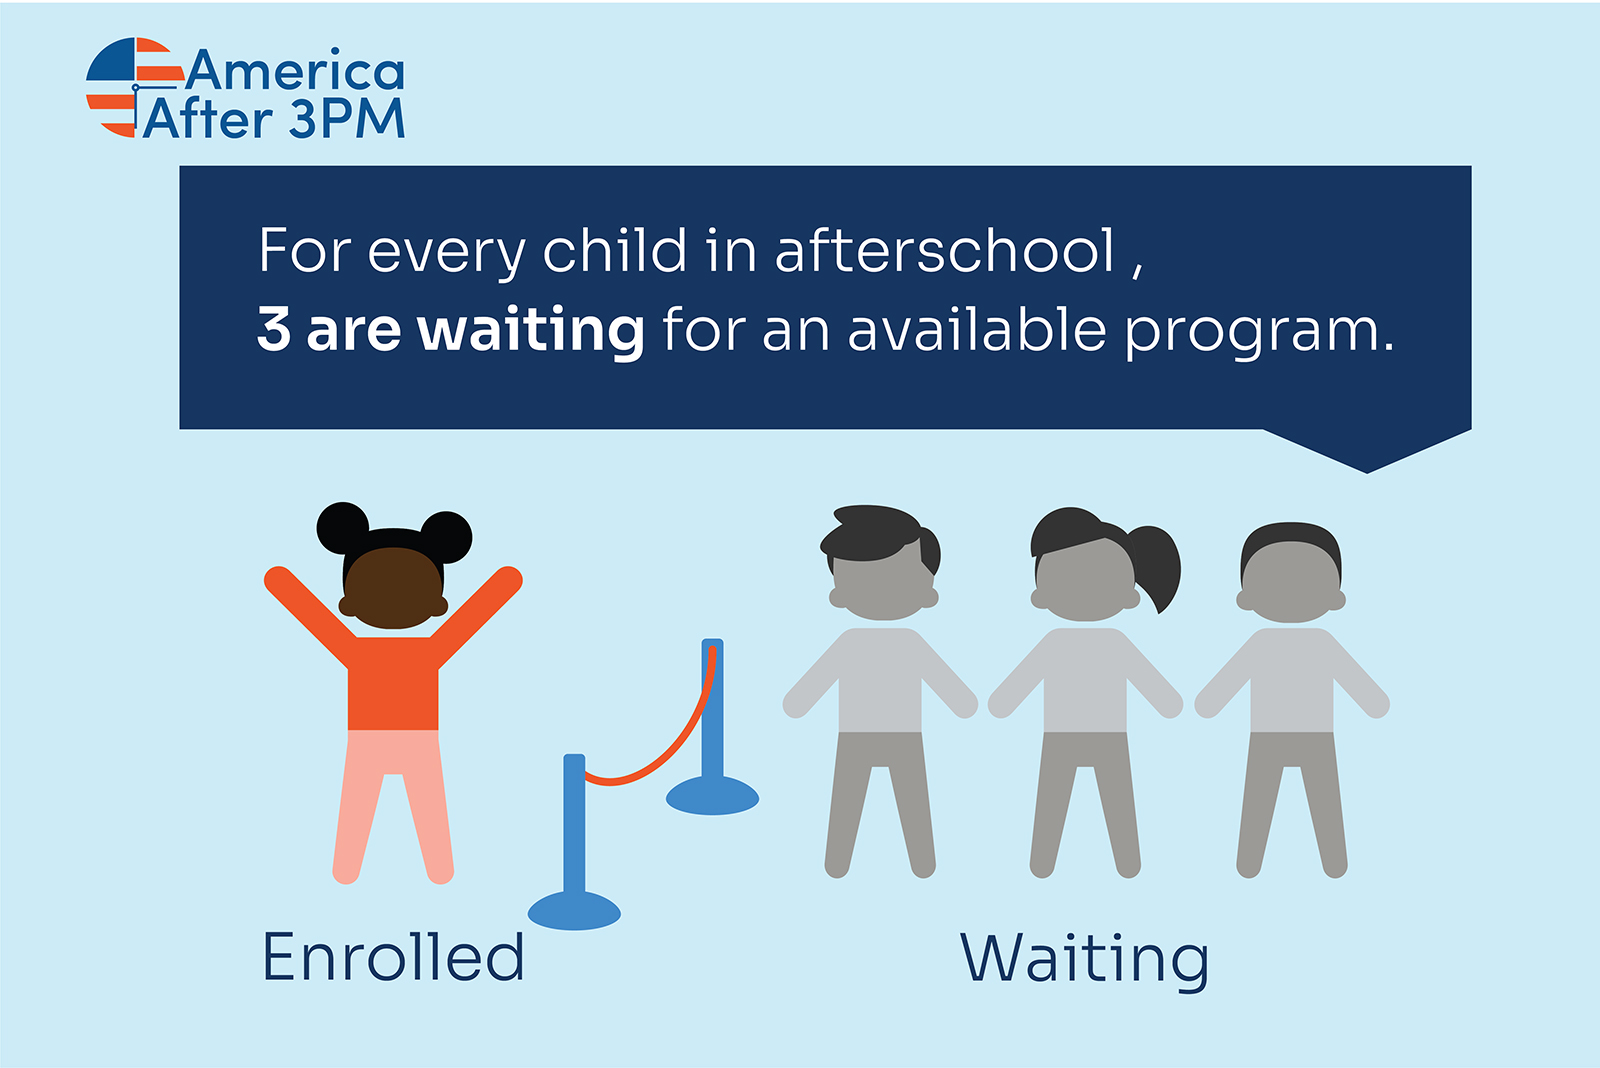 A graphic image showing that three in four children in America who want to attend afterschool programs cannot do so because there is not enough space in afterschool programs.